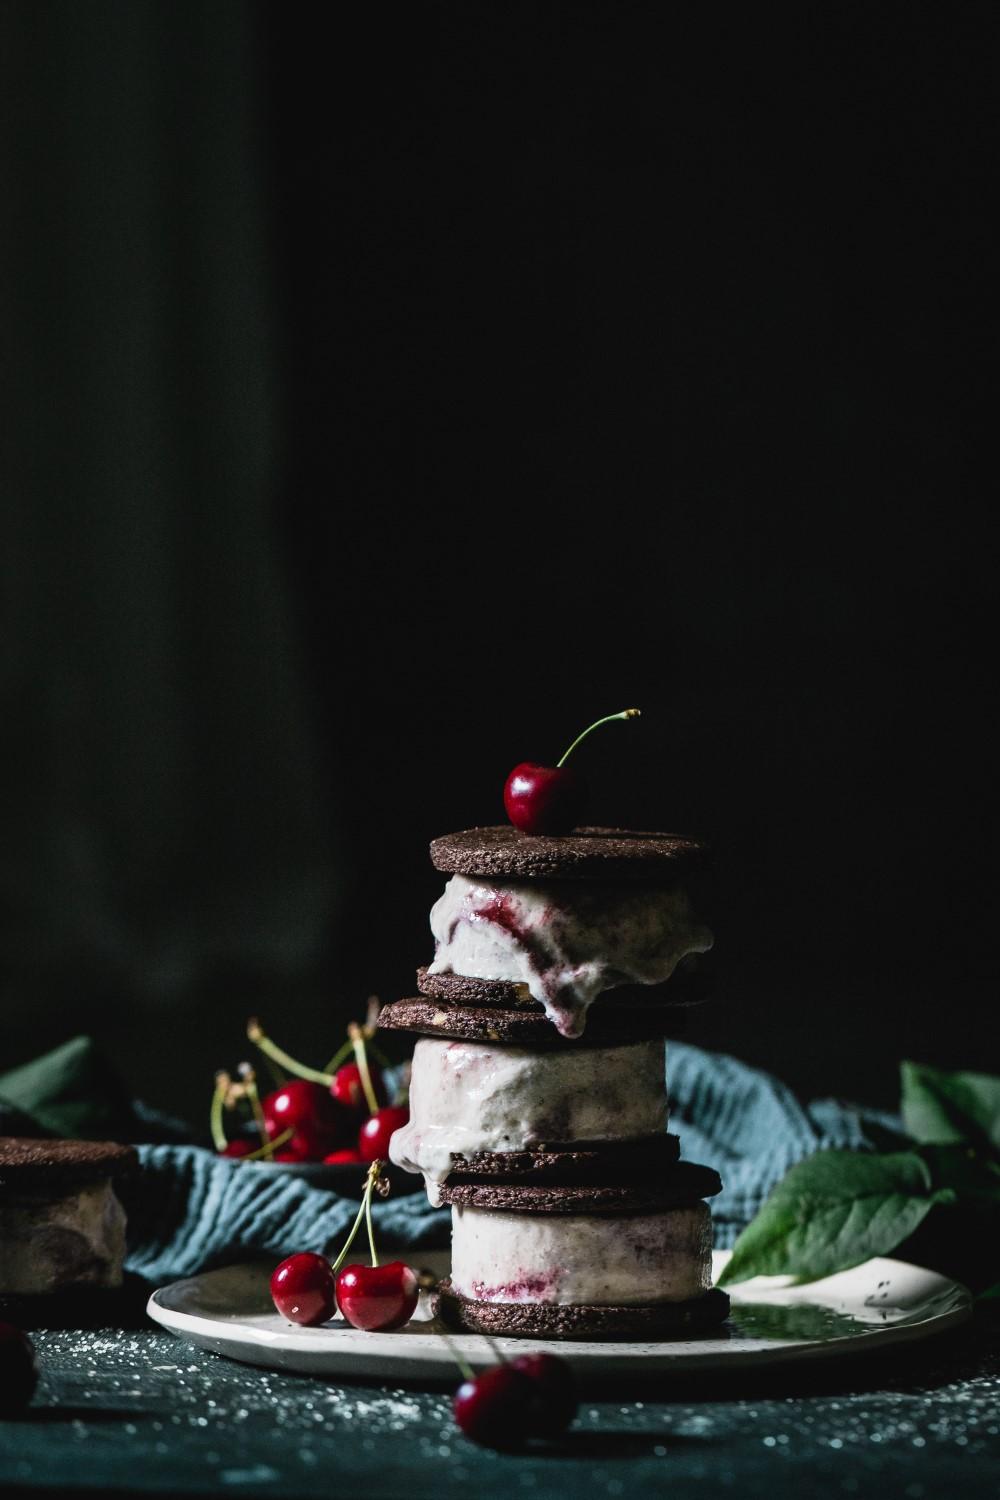 Wrap your hands around something wonderful with this vegan cherry almond ice cream between two delicious almond chocolate cookies.